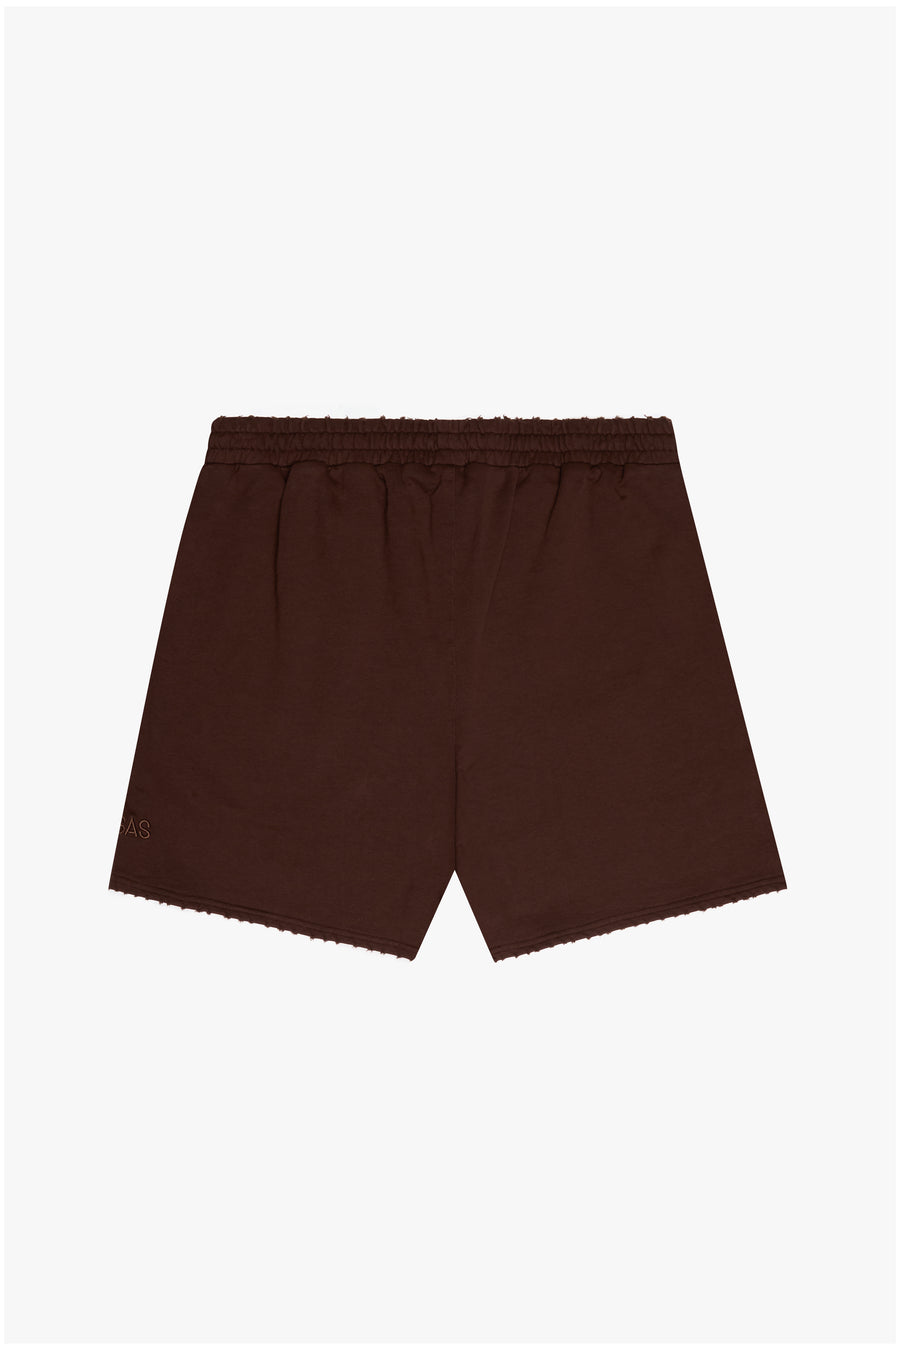 "SUAVA" BROWN FRENCH TERRY SHORTS